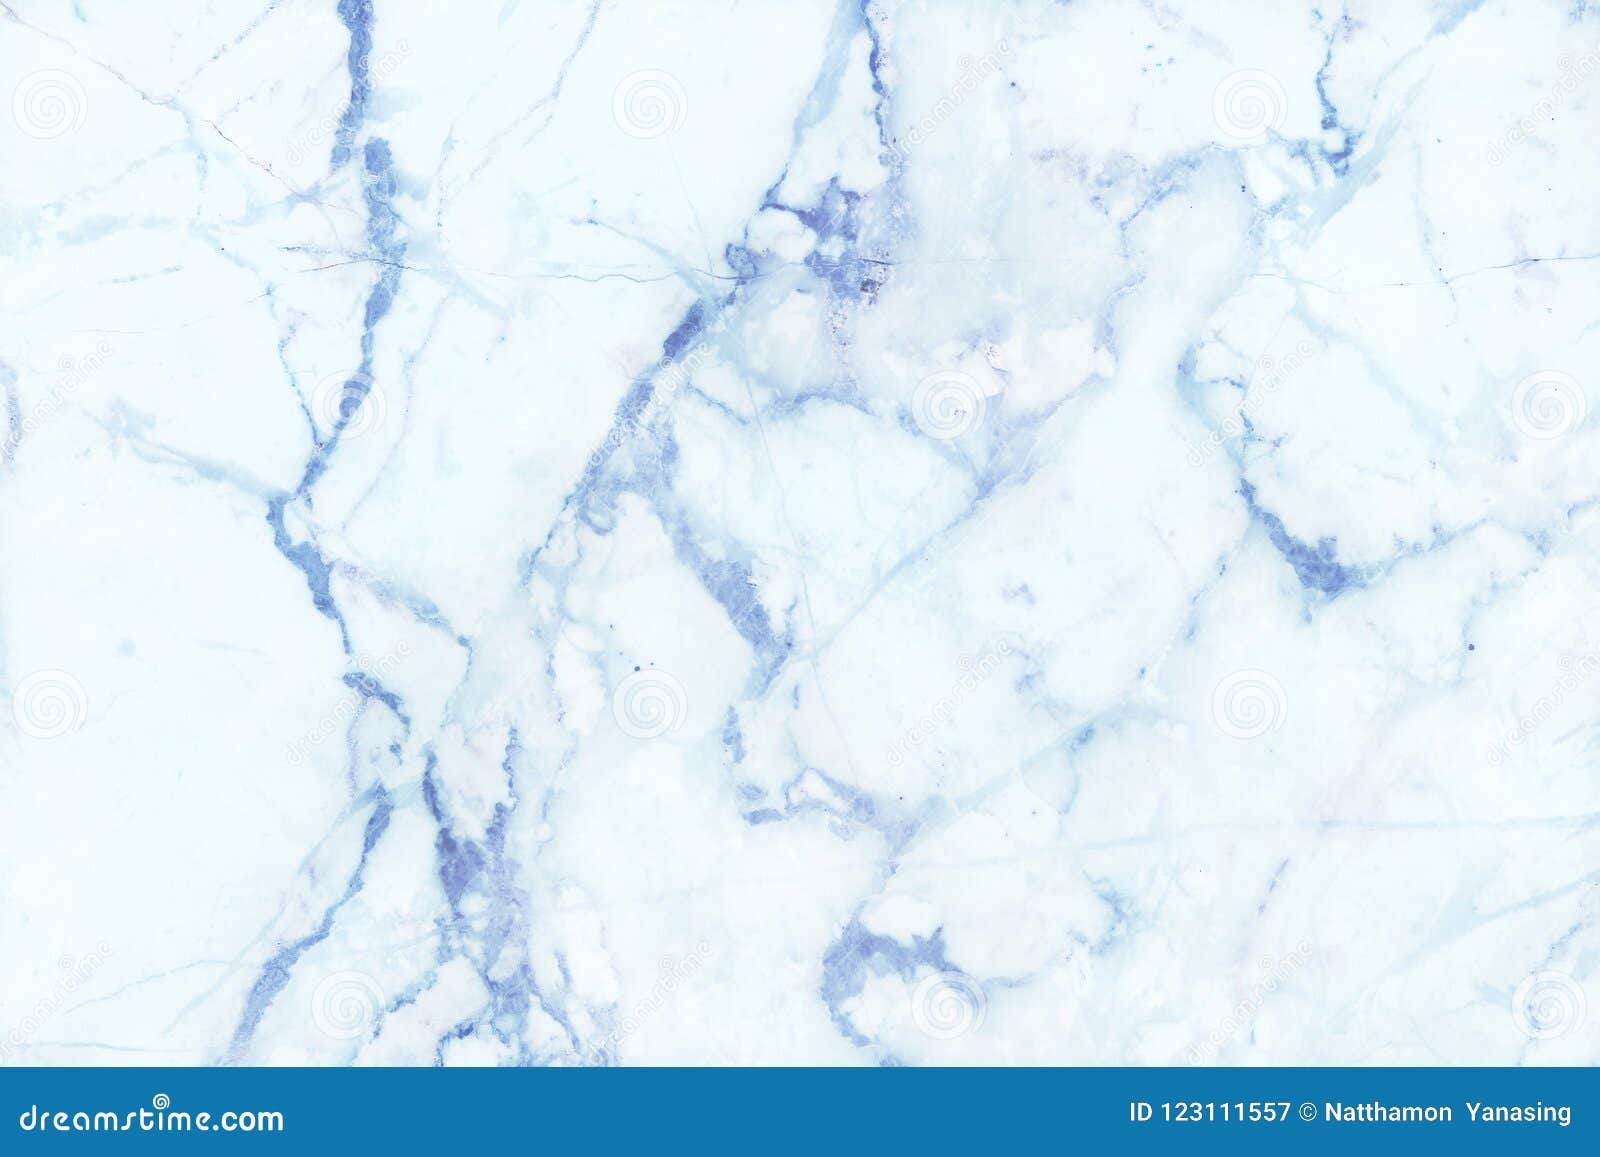 Blue Pastel Marble Texture Background with Detailed Structure High  Resolution Bright and Luxurious Stock Image - Image of decoration,  luxurious: 123111557